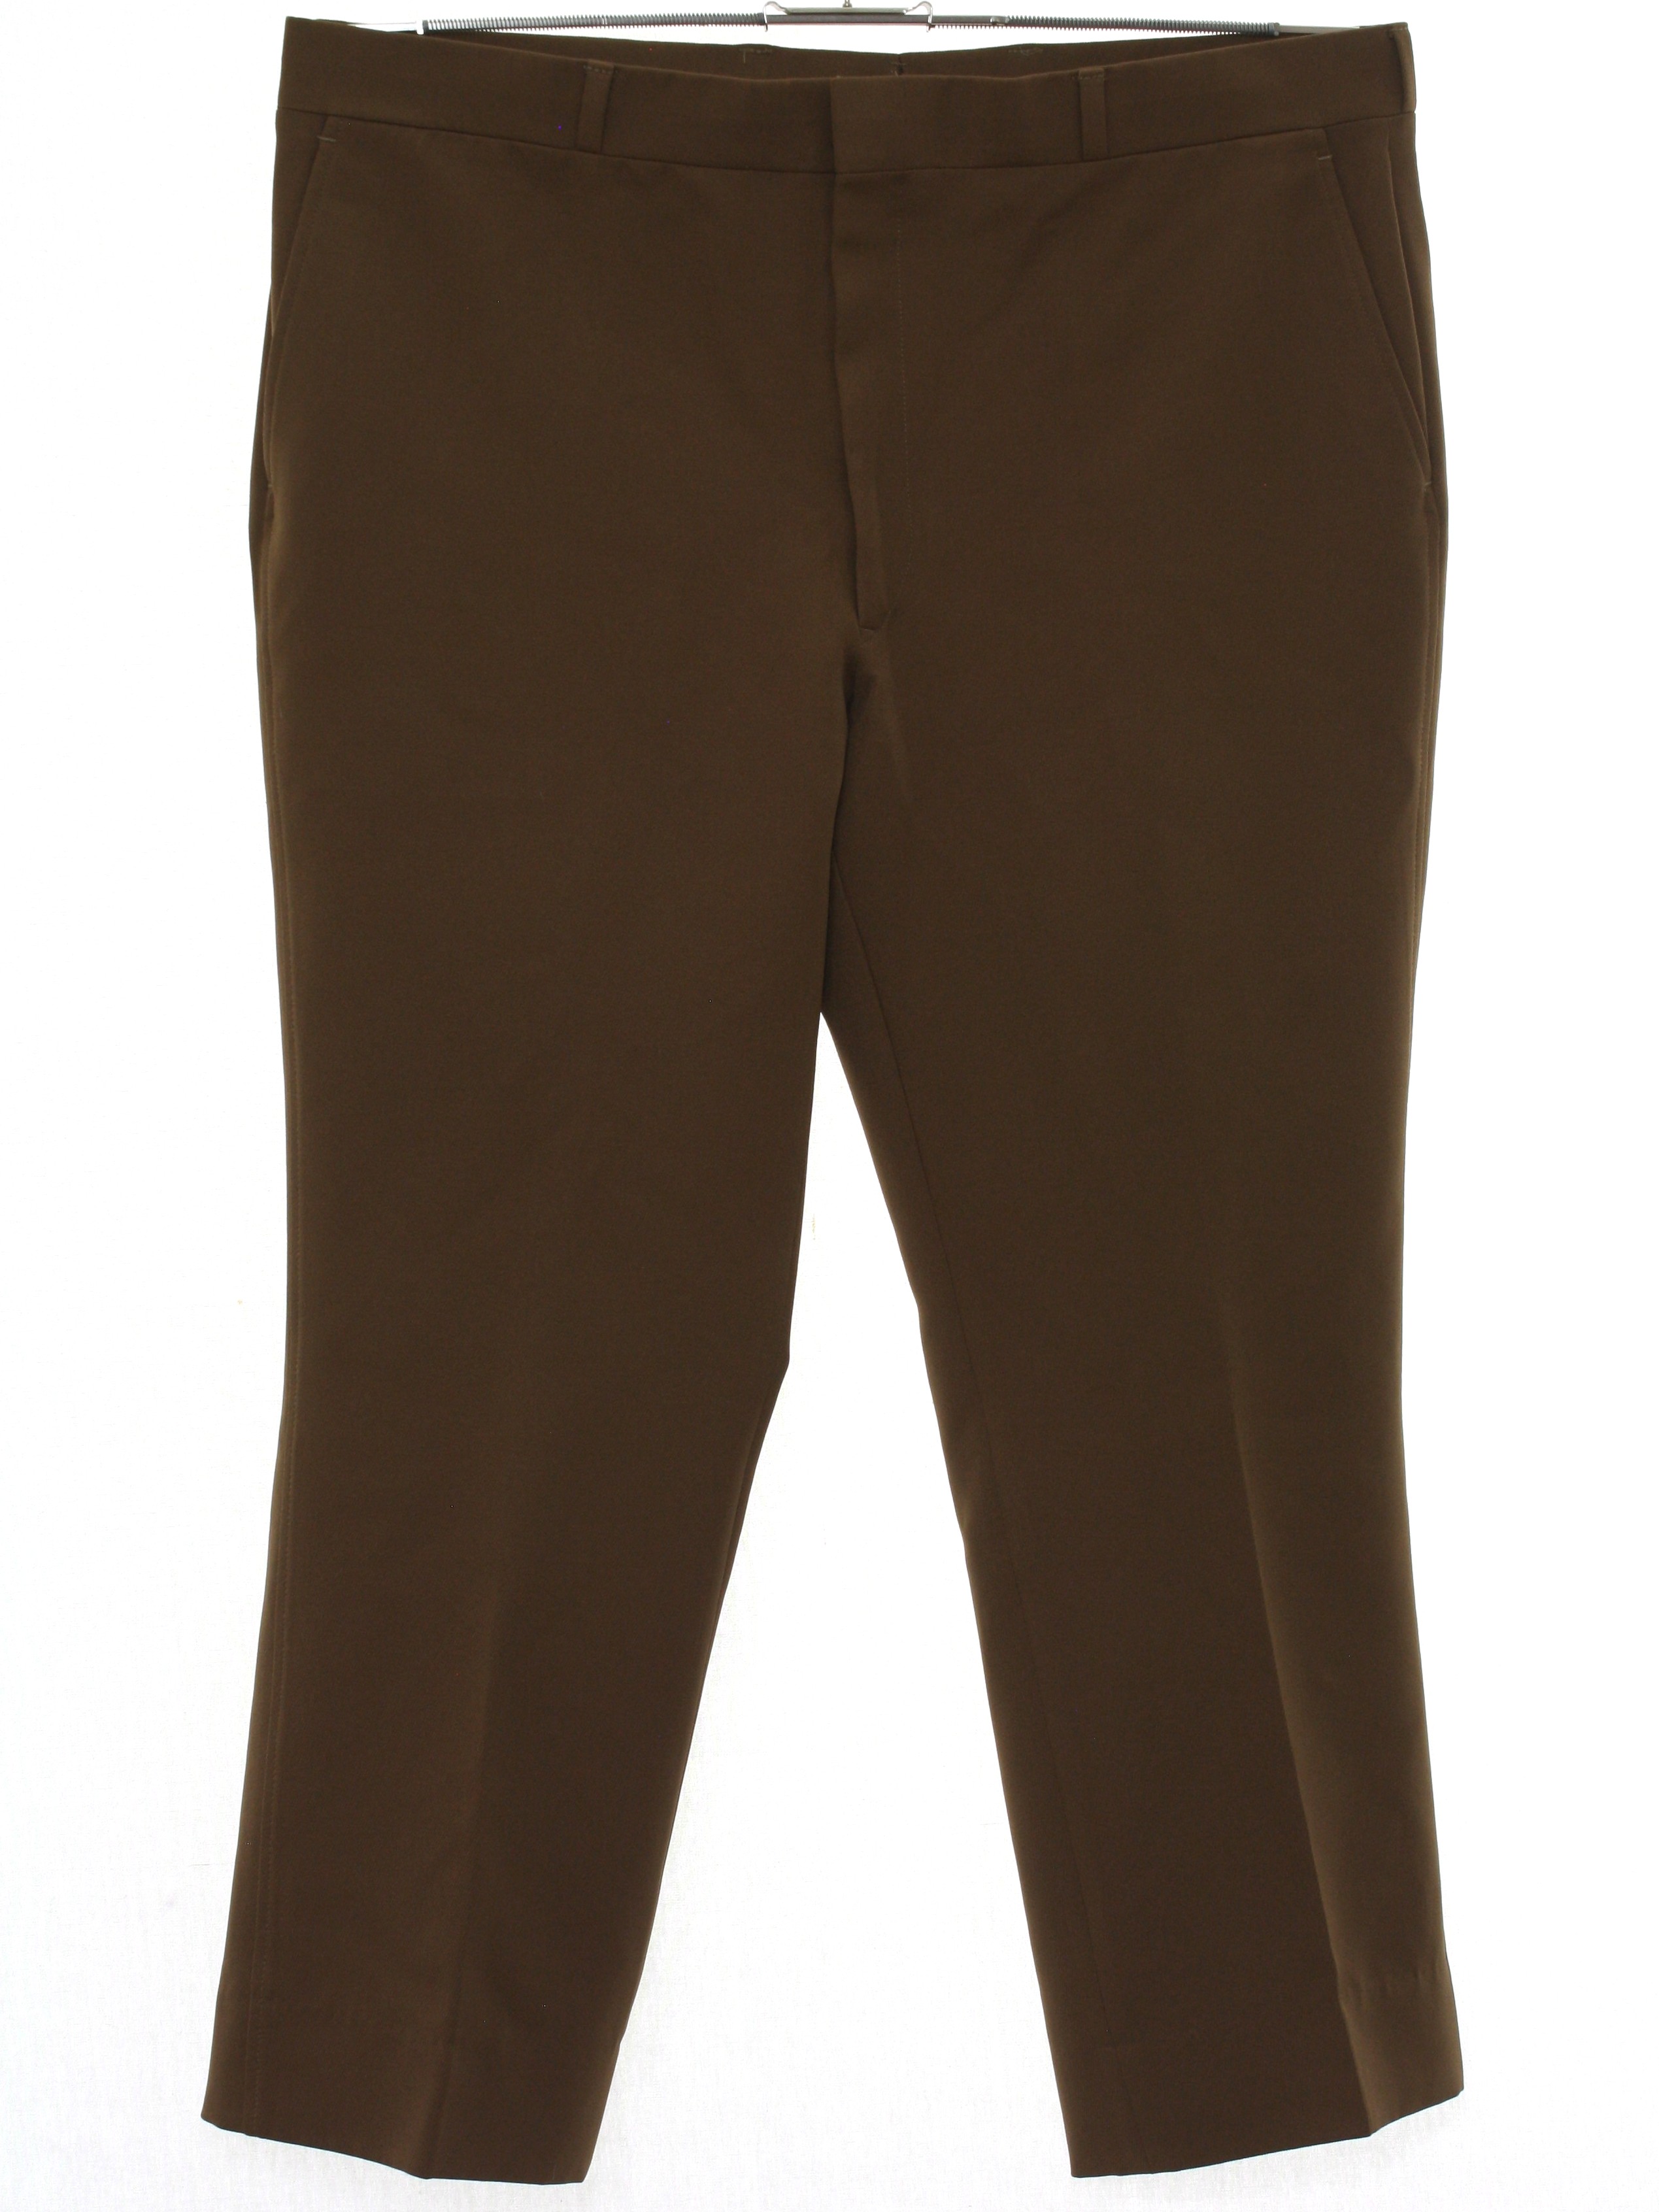 60's Mehlhafs Pants: 60s -Mehlhafs- Mens brown solid colored polyester ...